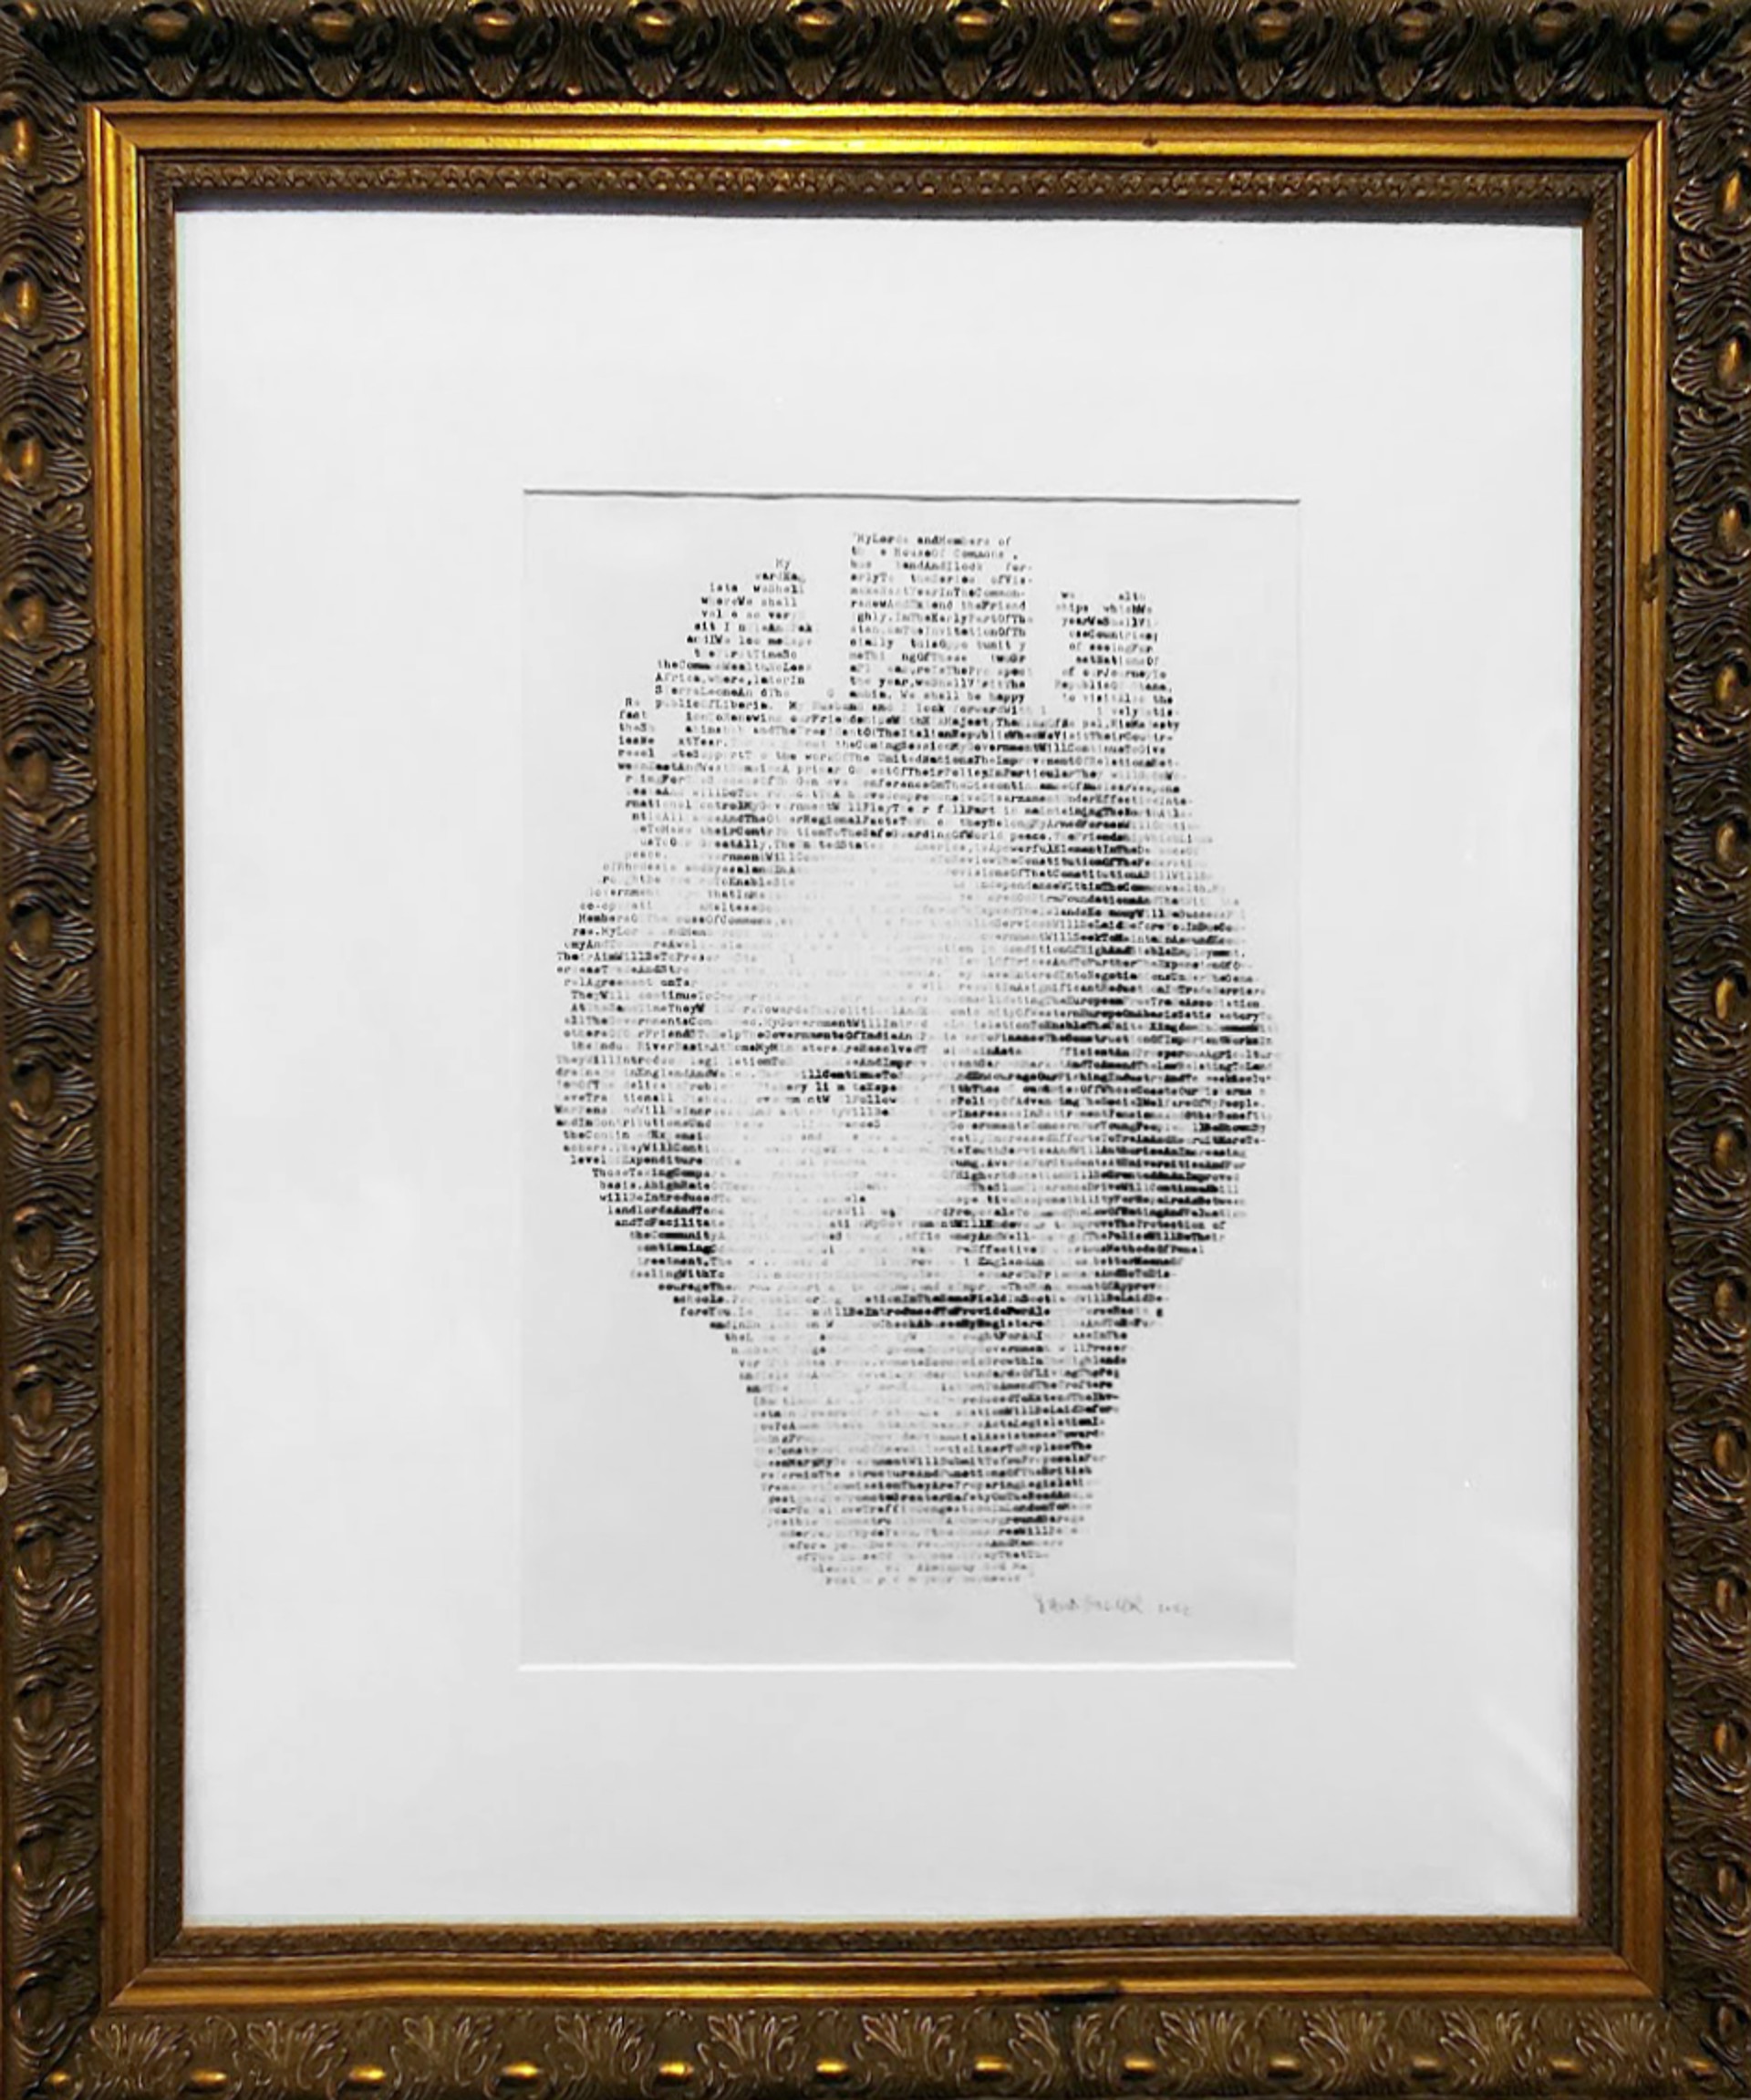 Queen Elizabeth II (Text: State Opening of Parliament, 4 November 1952) by David Hollier